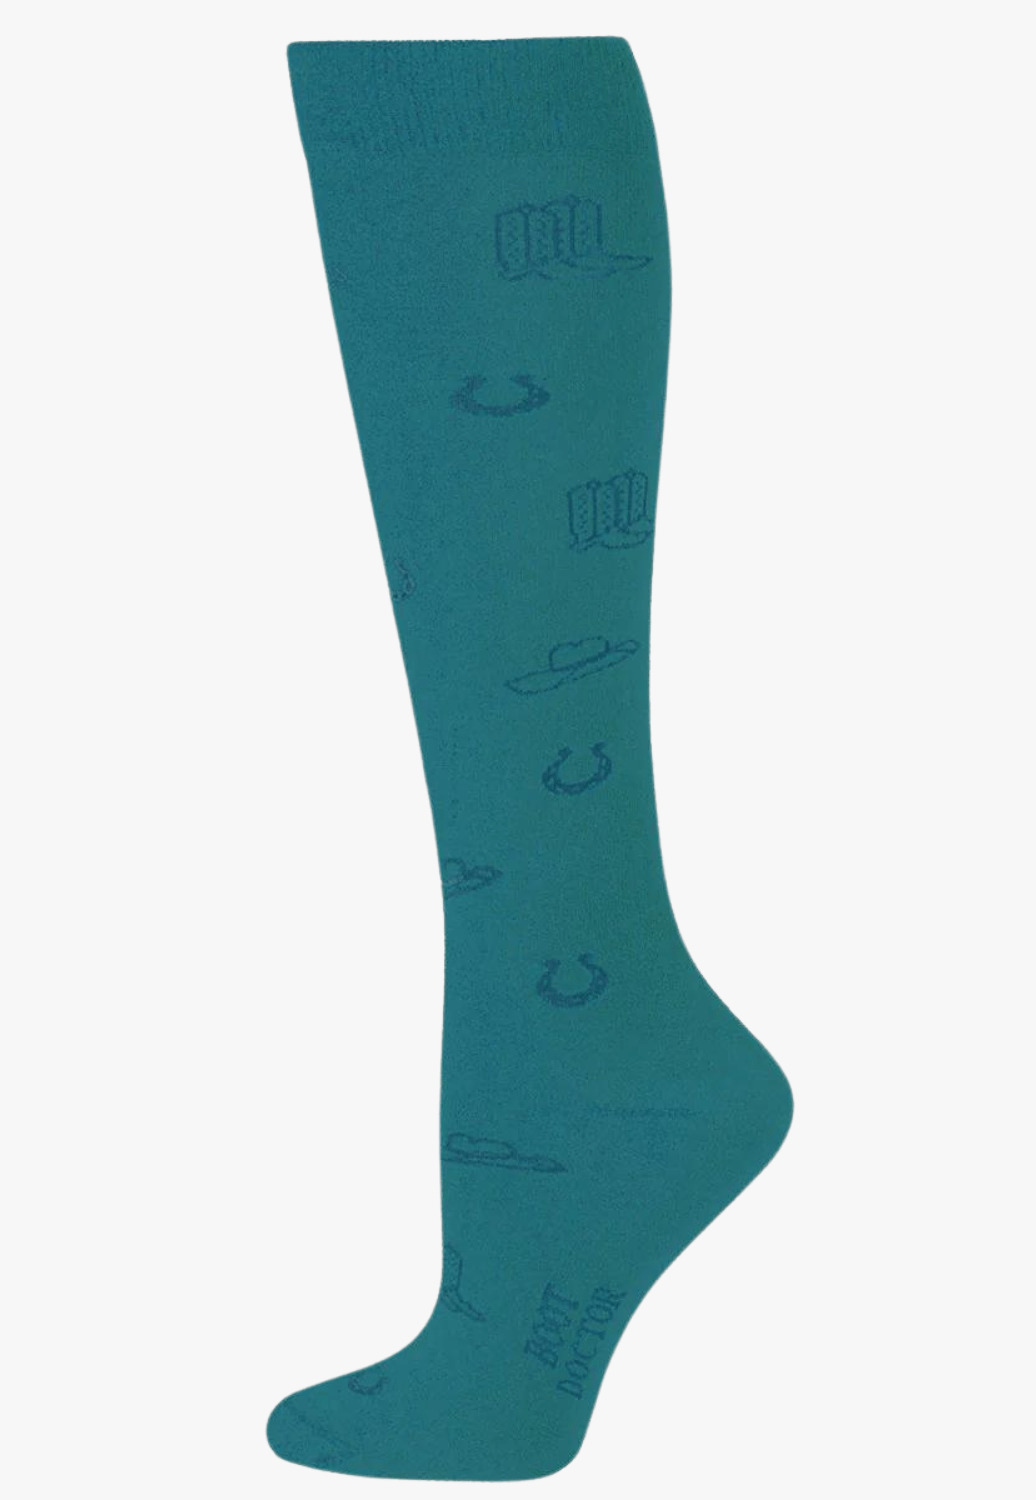 Boot Doctor ACCESSORIES-Socks OSFA / Turquoise Boot Doctor Womens Cowboy Pattern Socks